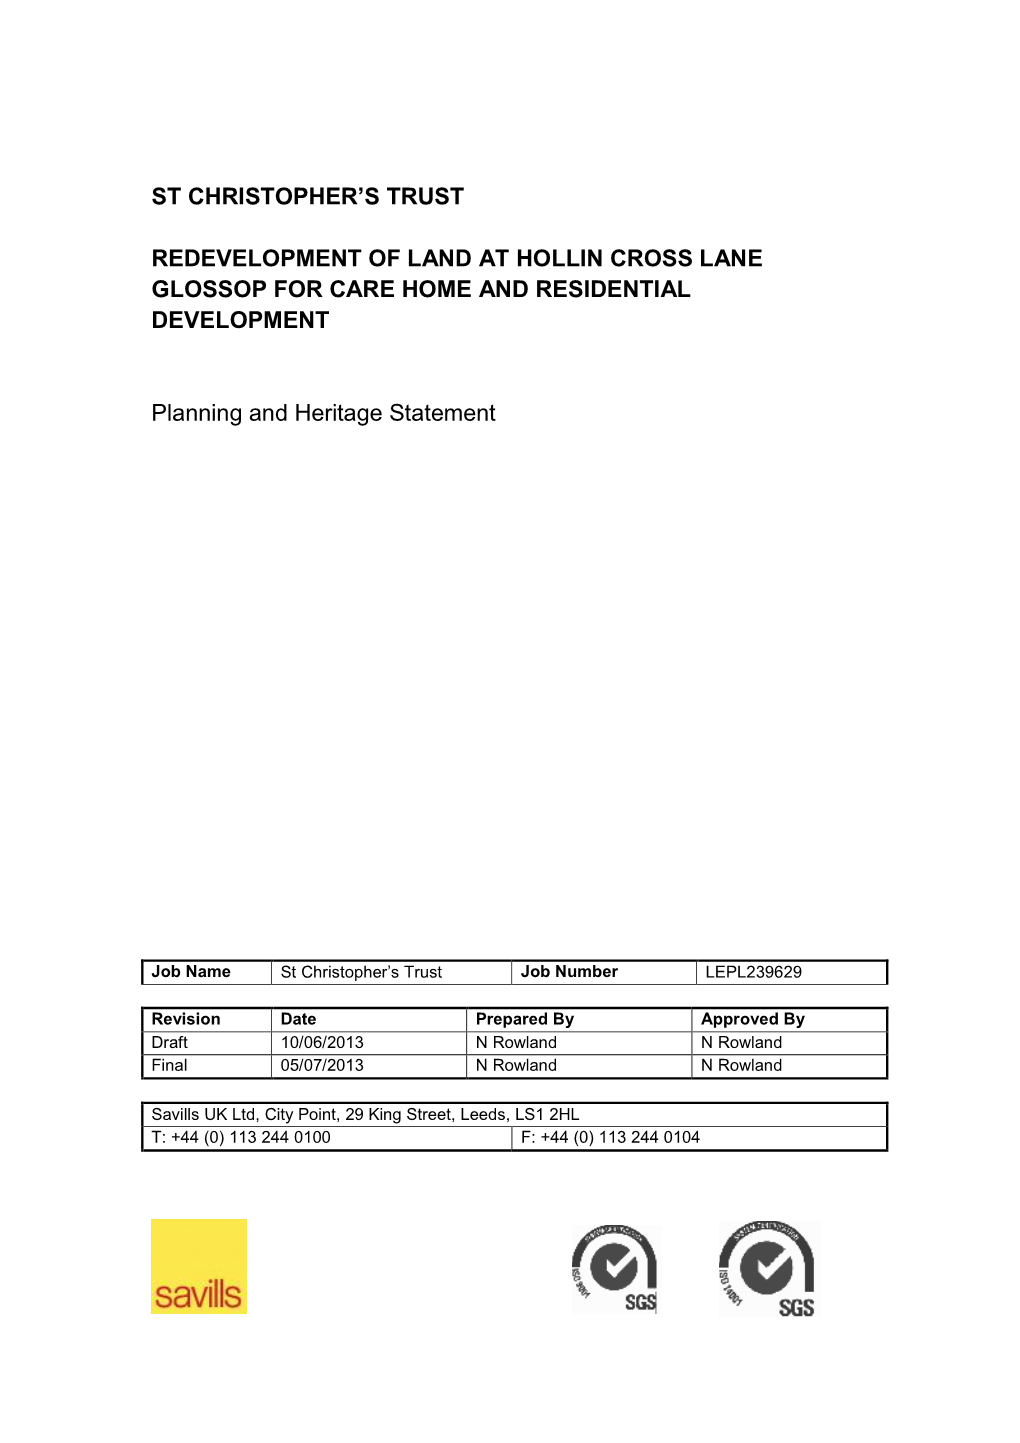 Glossop Planning and Heritage Statement FINAL05.07.13